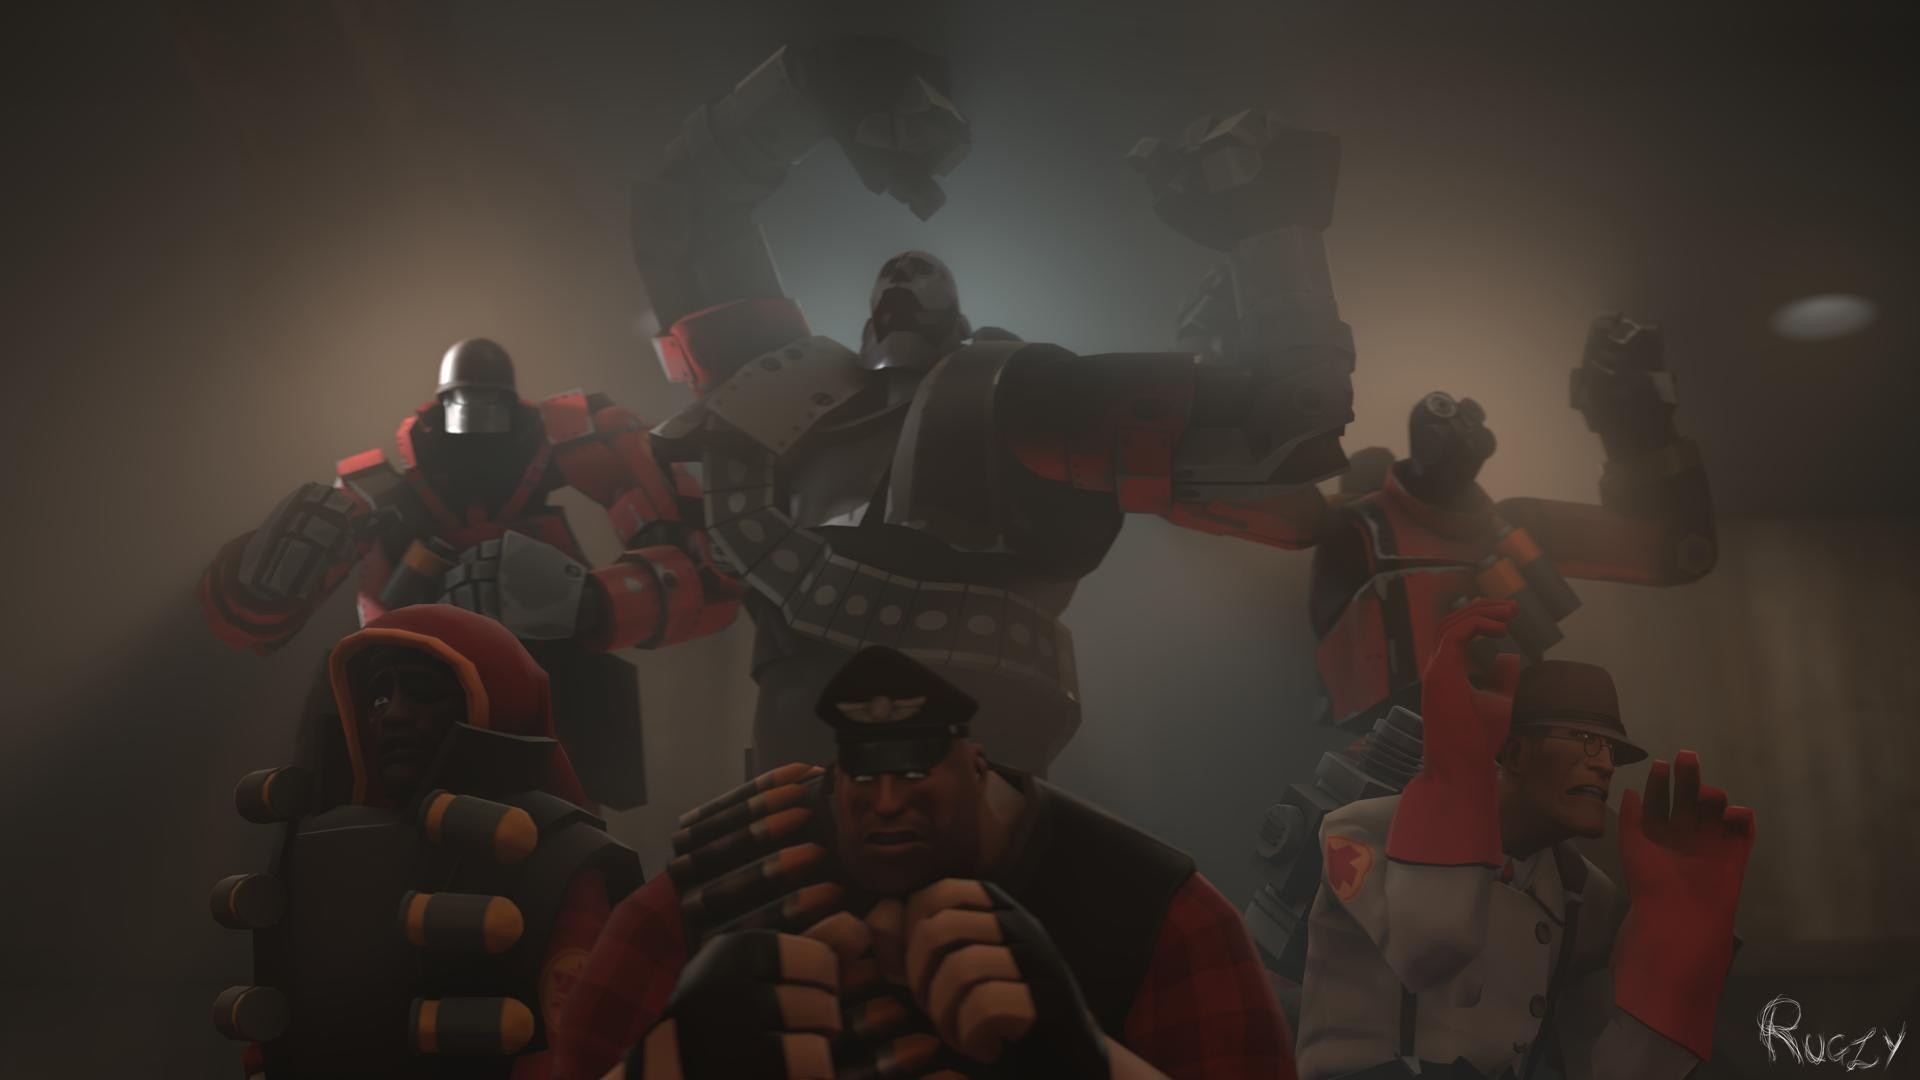 General 1920x1080 Team Fortress 2 PC gaming video game art